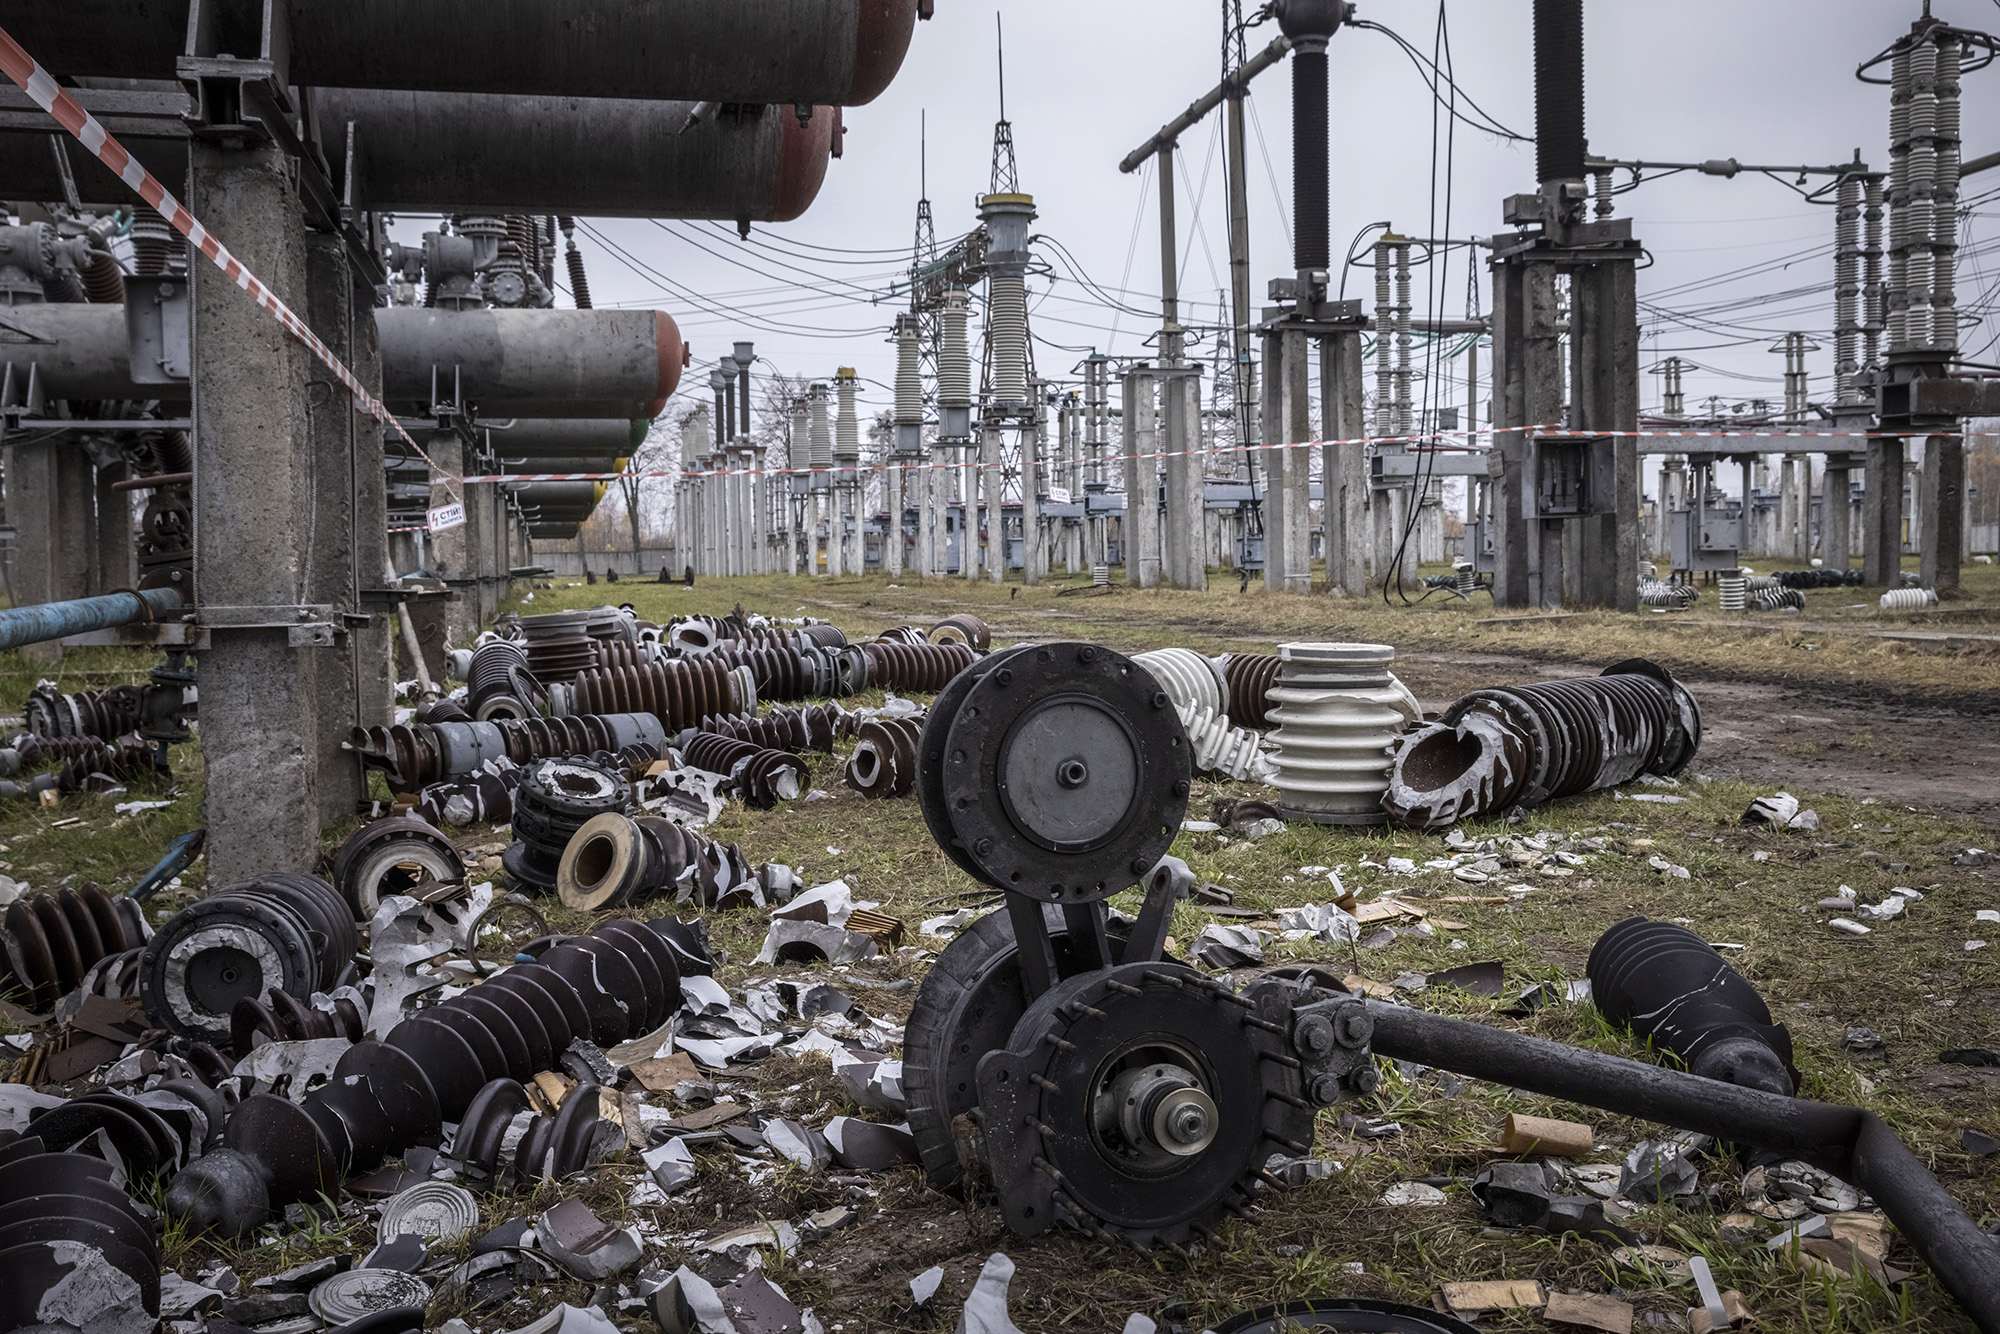 A high voltage substation stands partially destroyed after the Ukrenergo power station was hit by a missile strike on October 10 in central Ukraine.